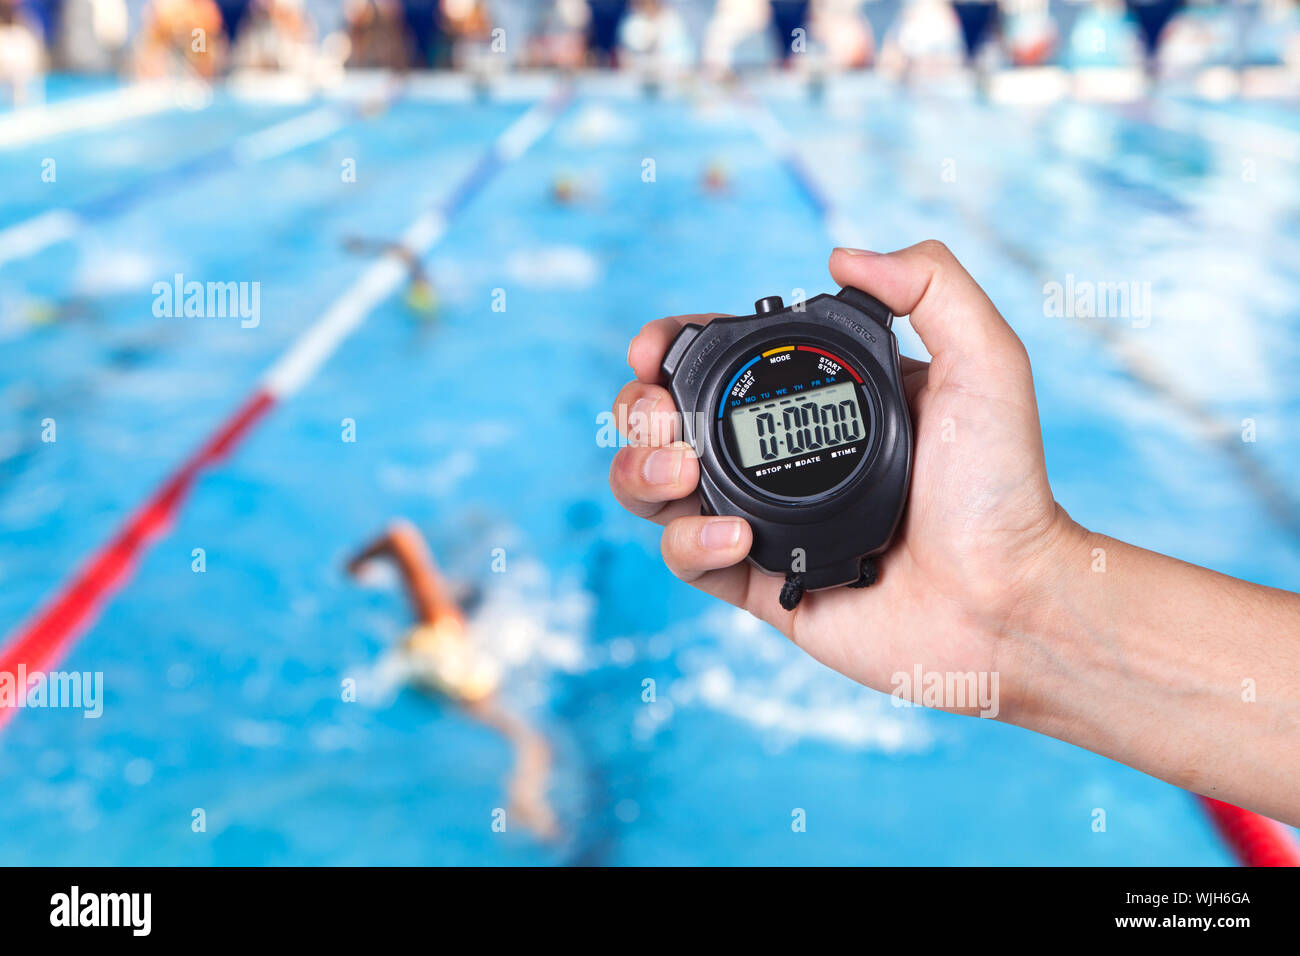 Cropped Image Of Coach Holding Stopwatch Against Swimming Pool Stock Photo  - Alamy